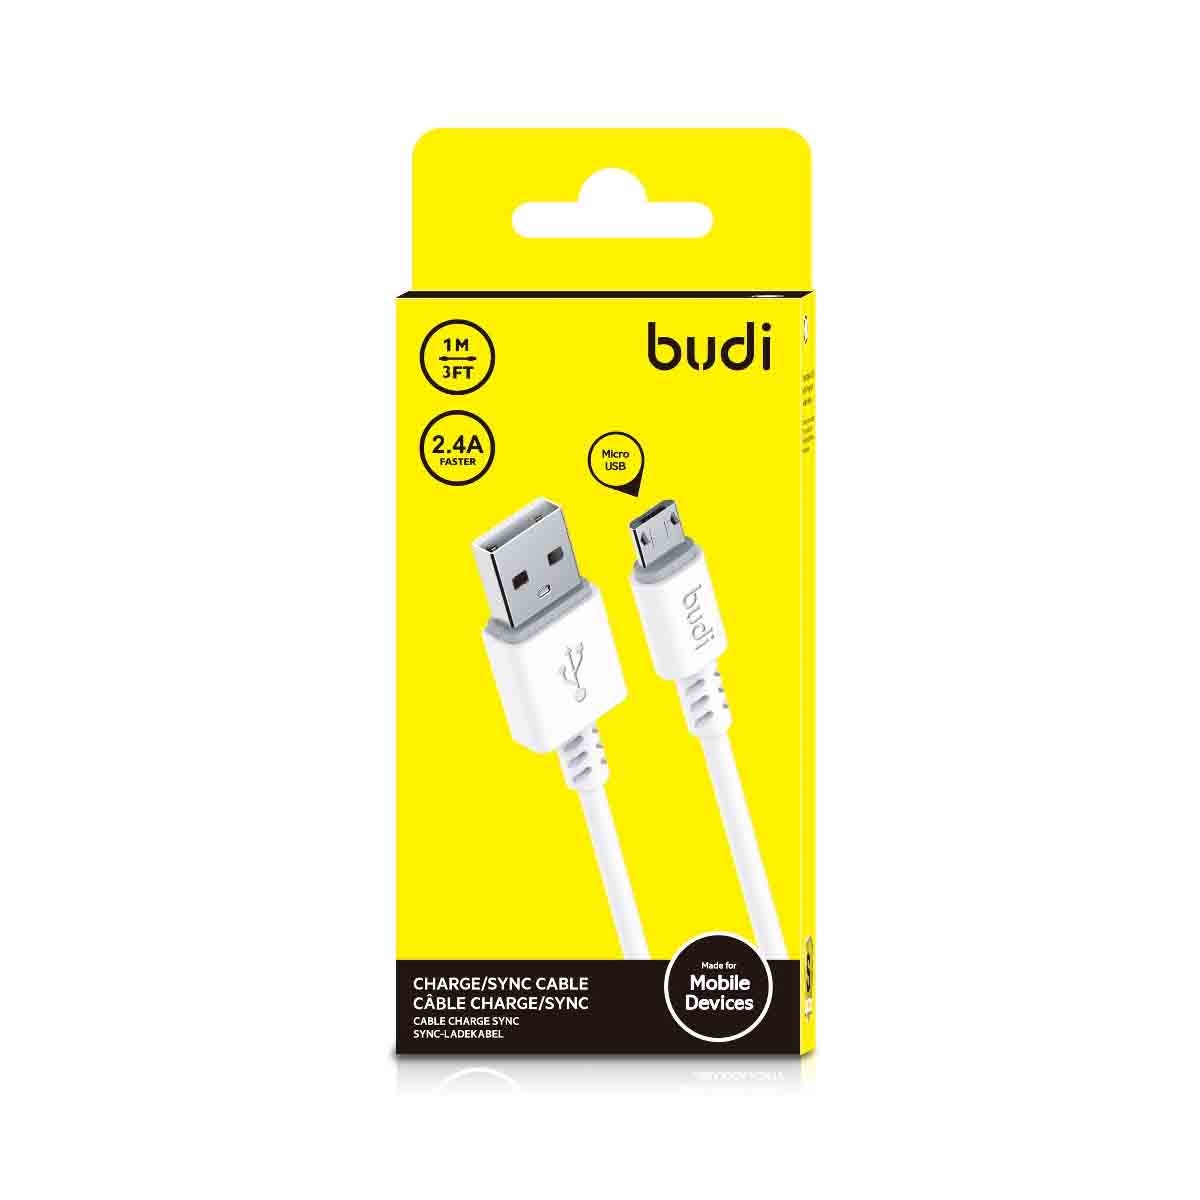 Budi Charge/Sync Cable سلك شاحن بيودي